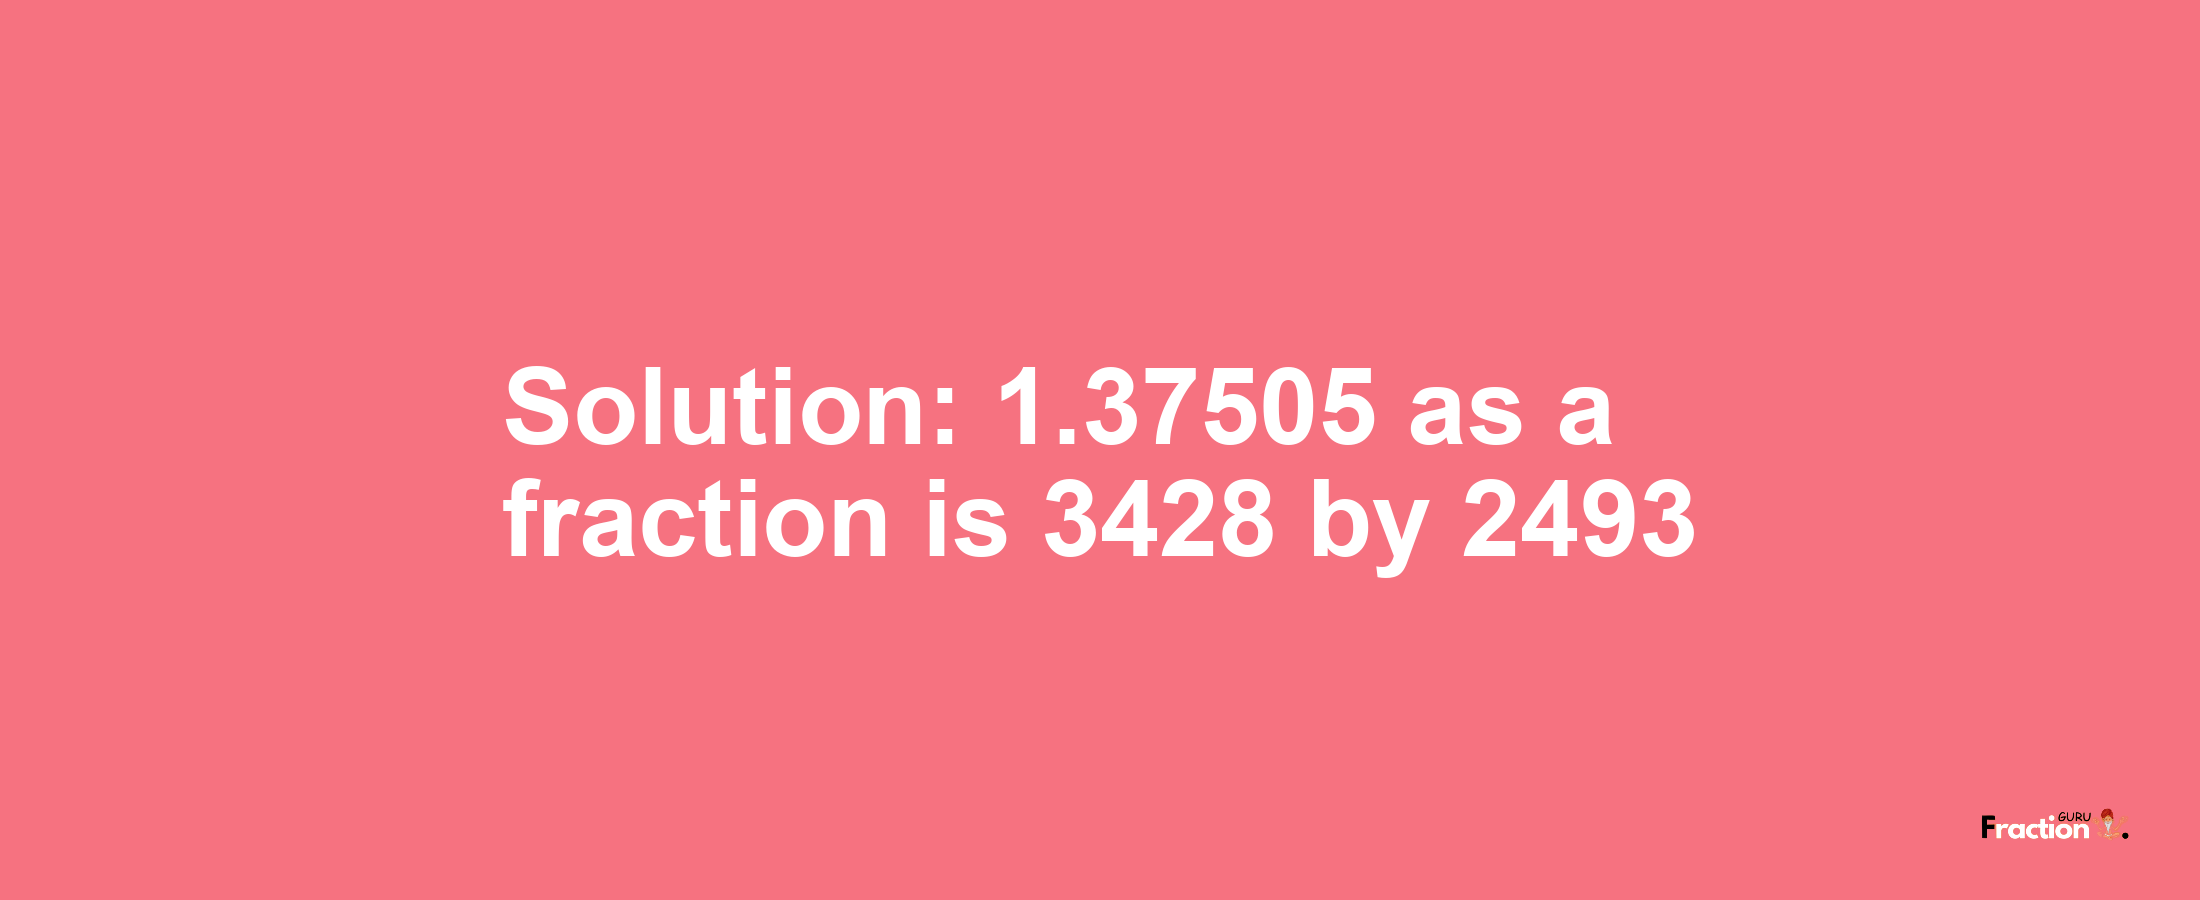 Solution:1.37505 as a fraction is 3428/2493